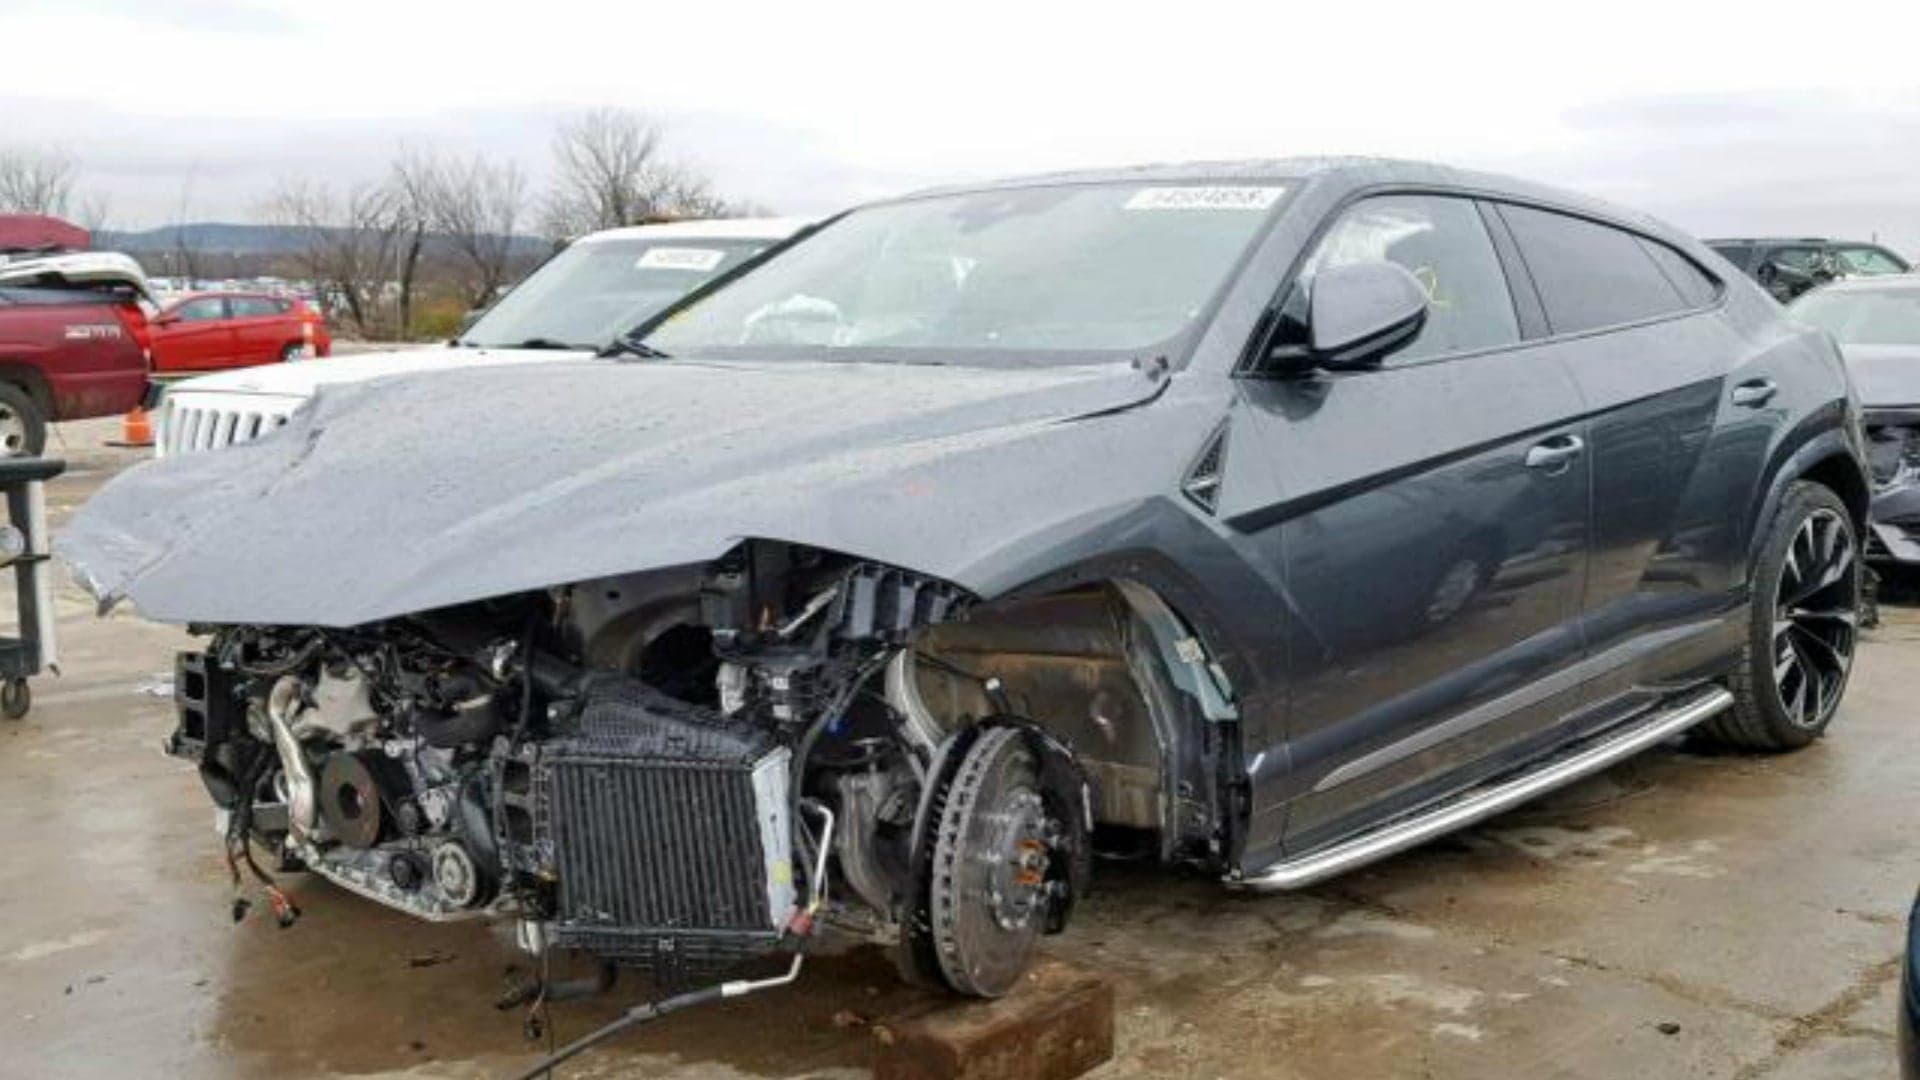 This Crashed Lamborghini Urus With 752 Miles Can Be Yours for $115K